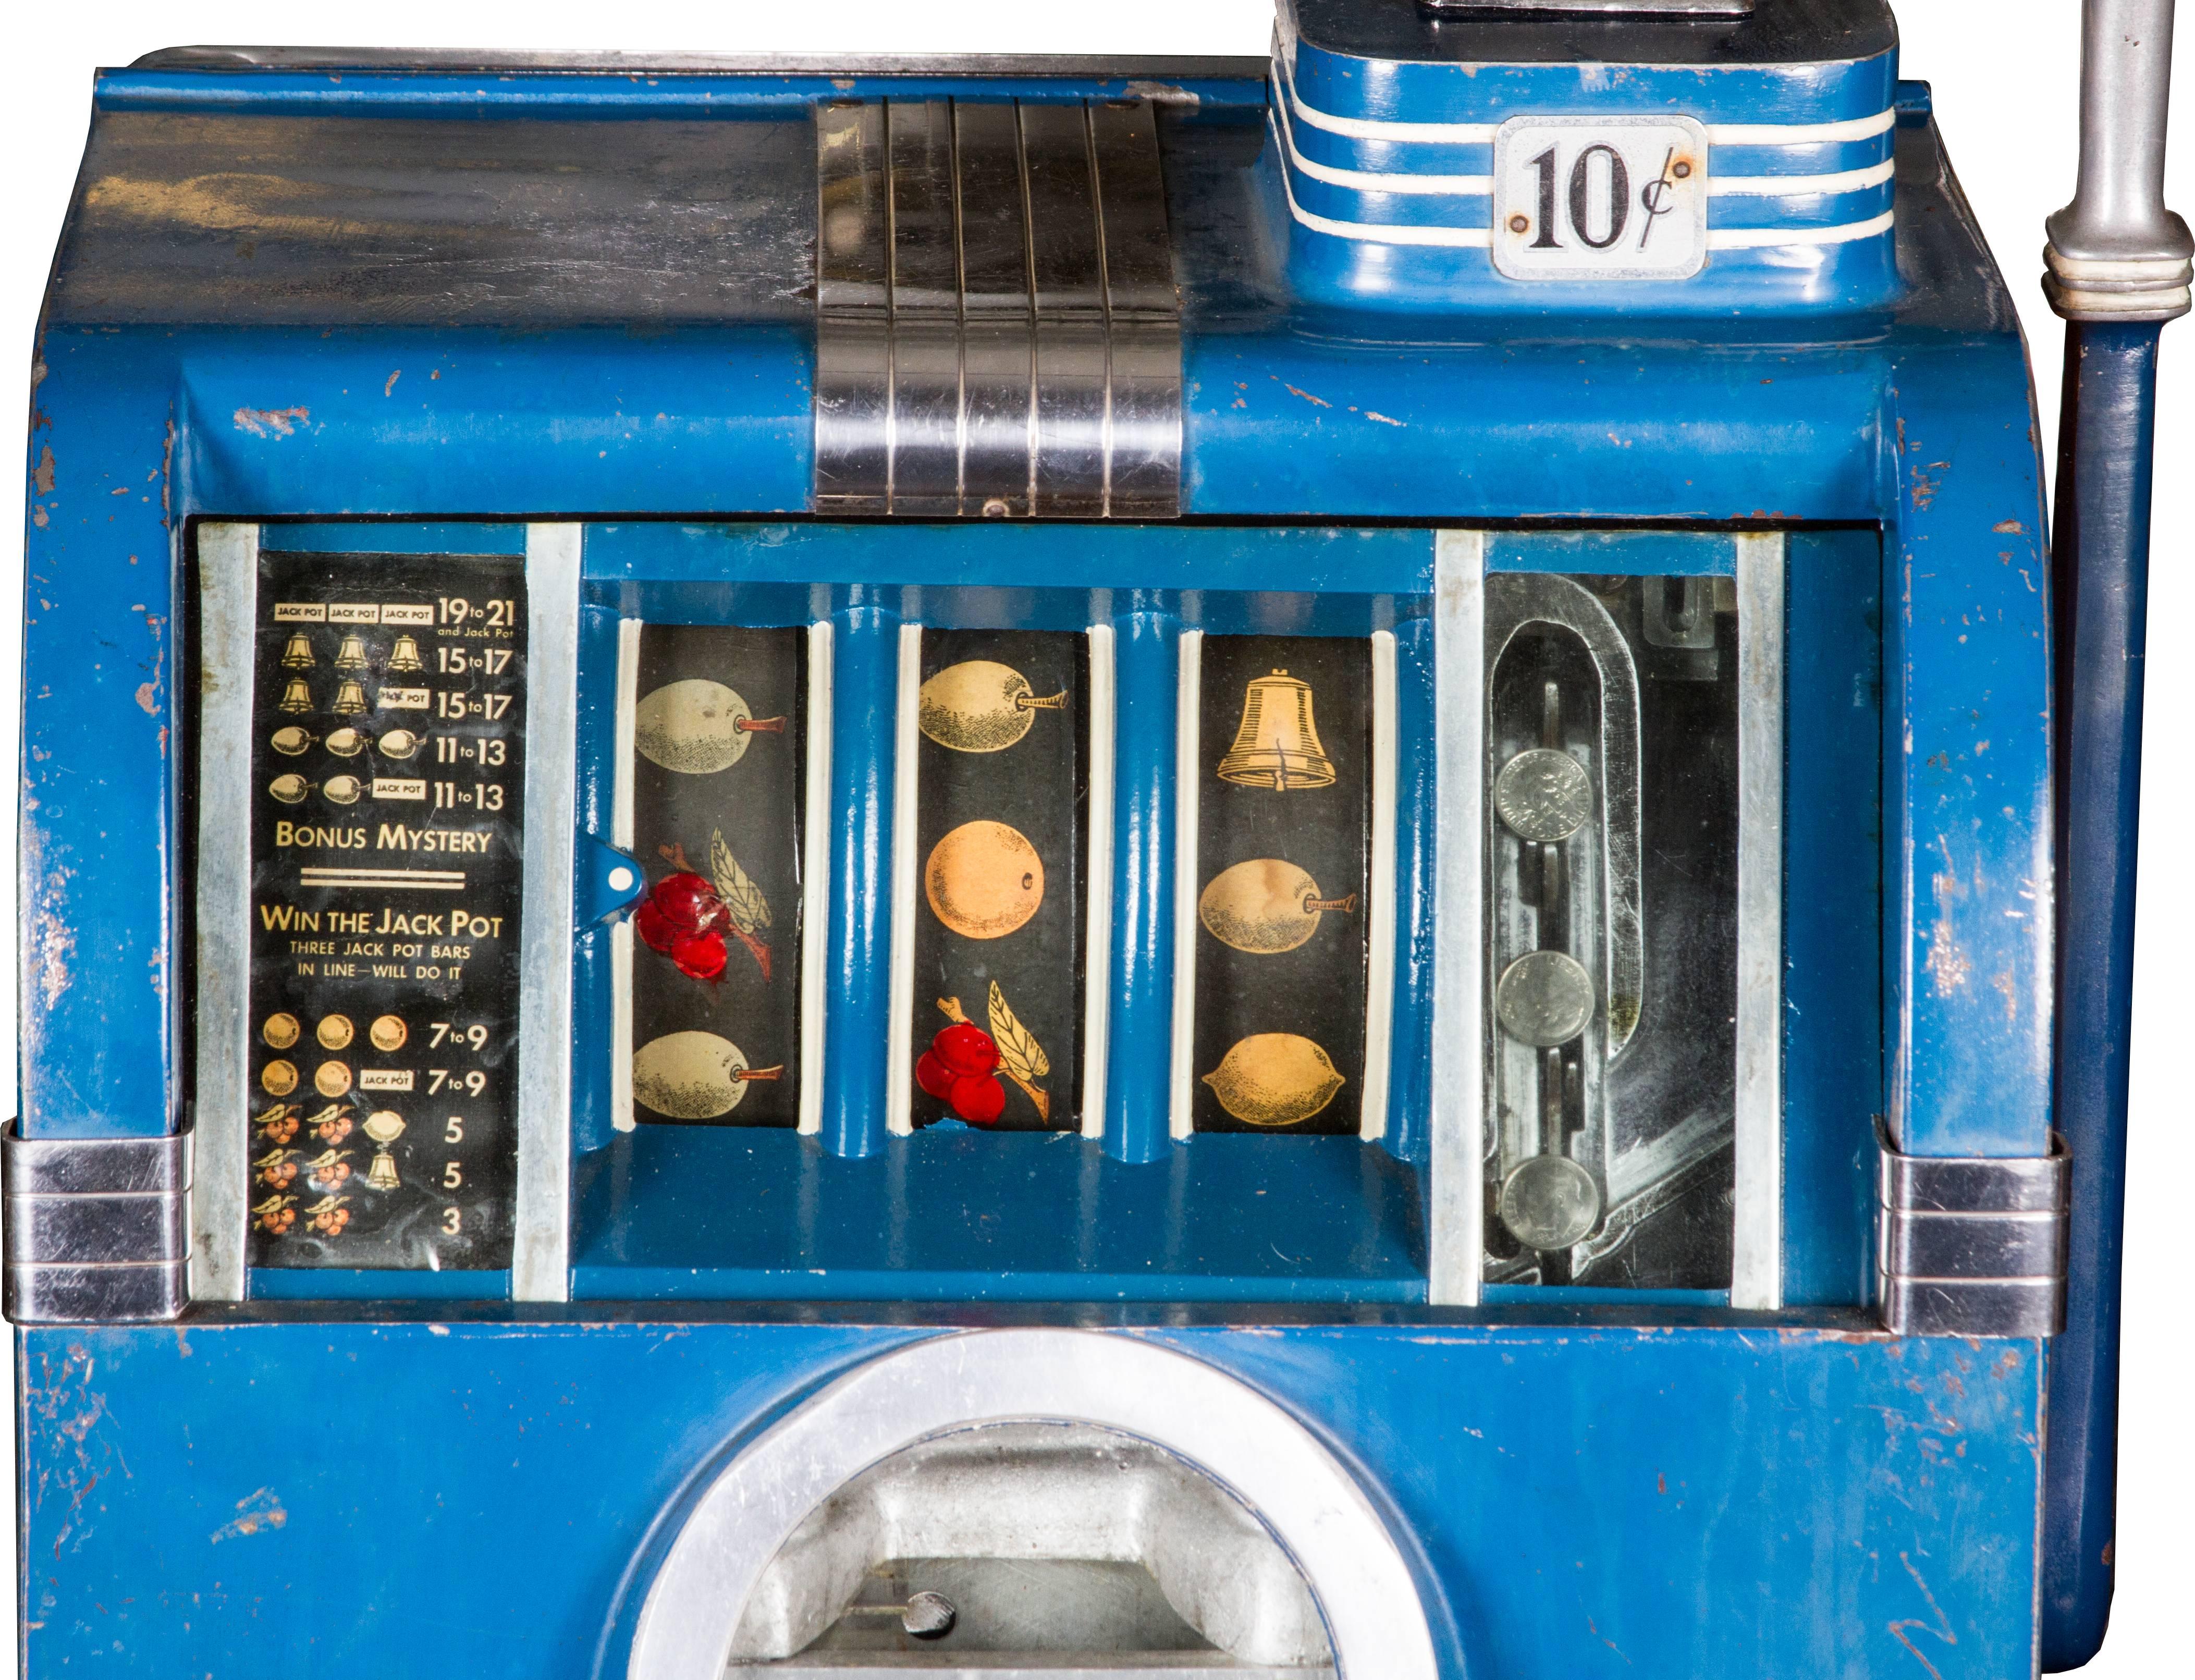 American 10 Cent Caille Cadet Slot Machine, circa 1936 with Keys